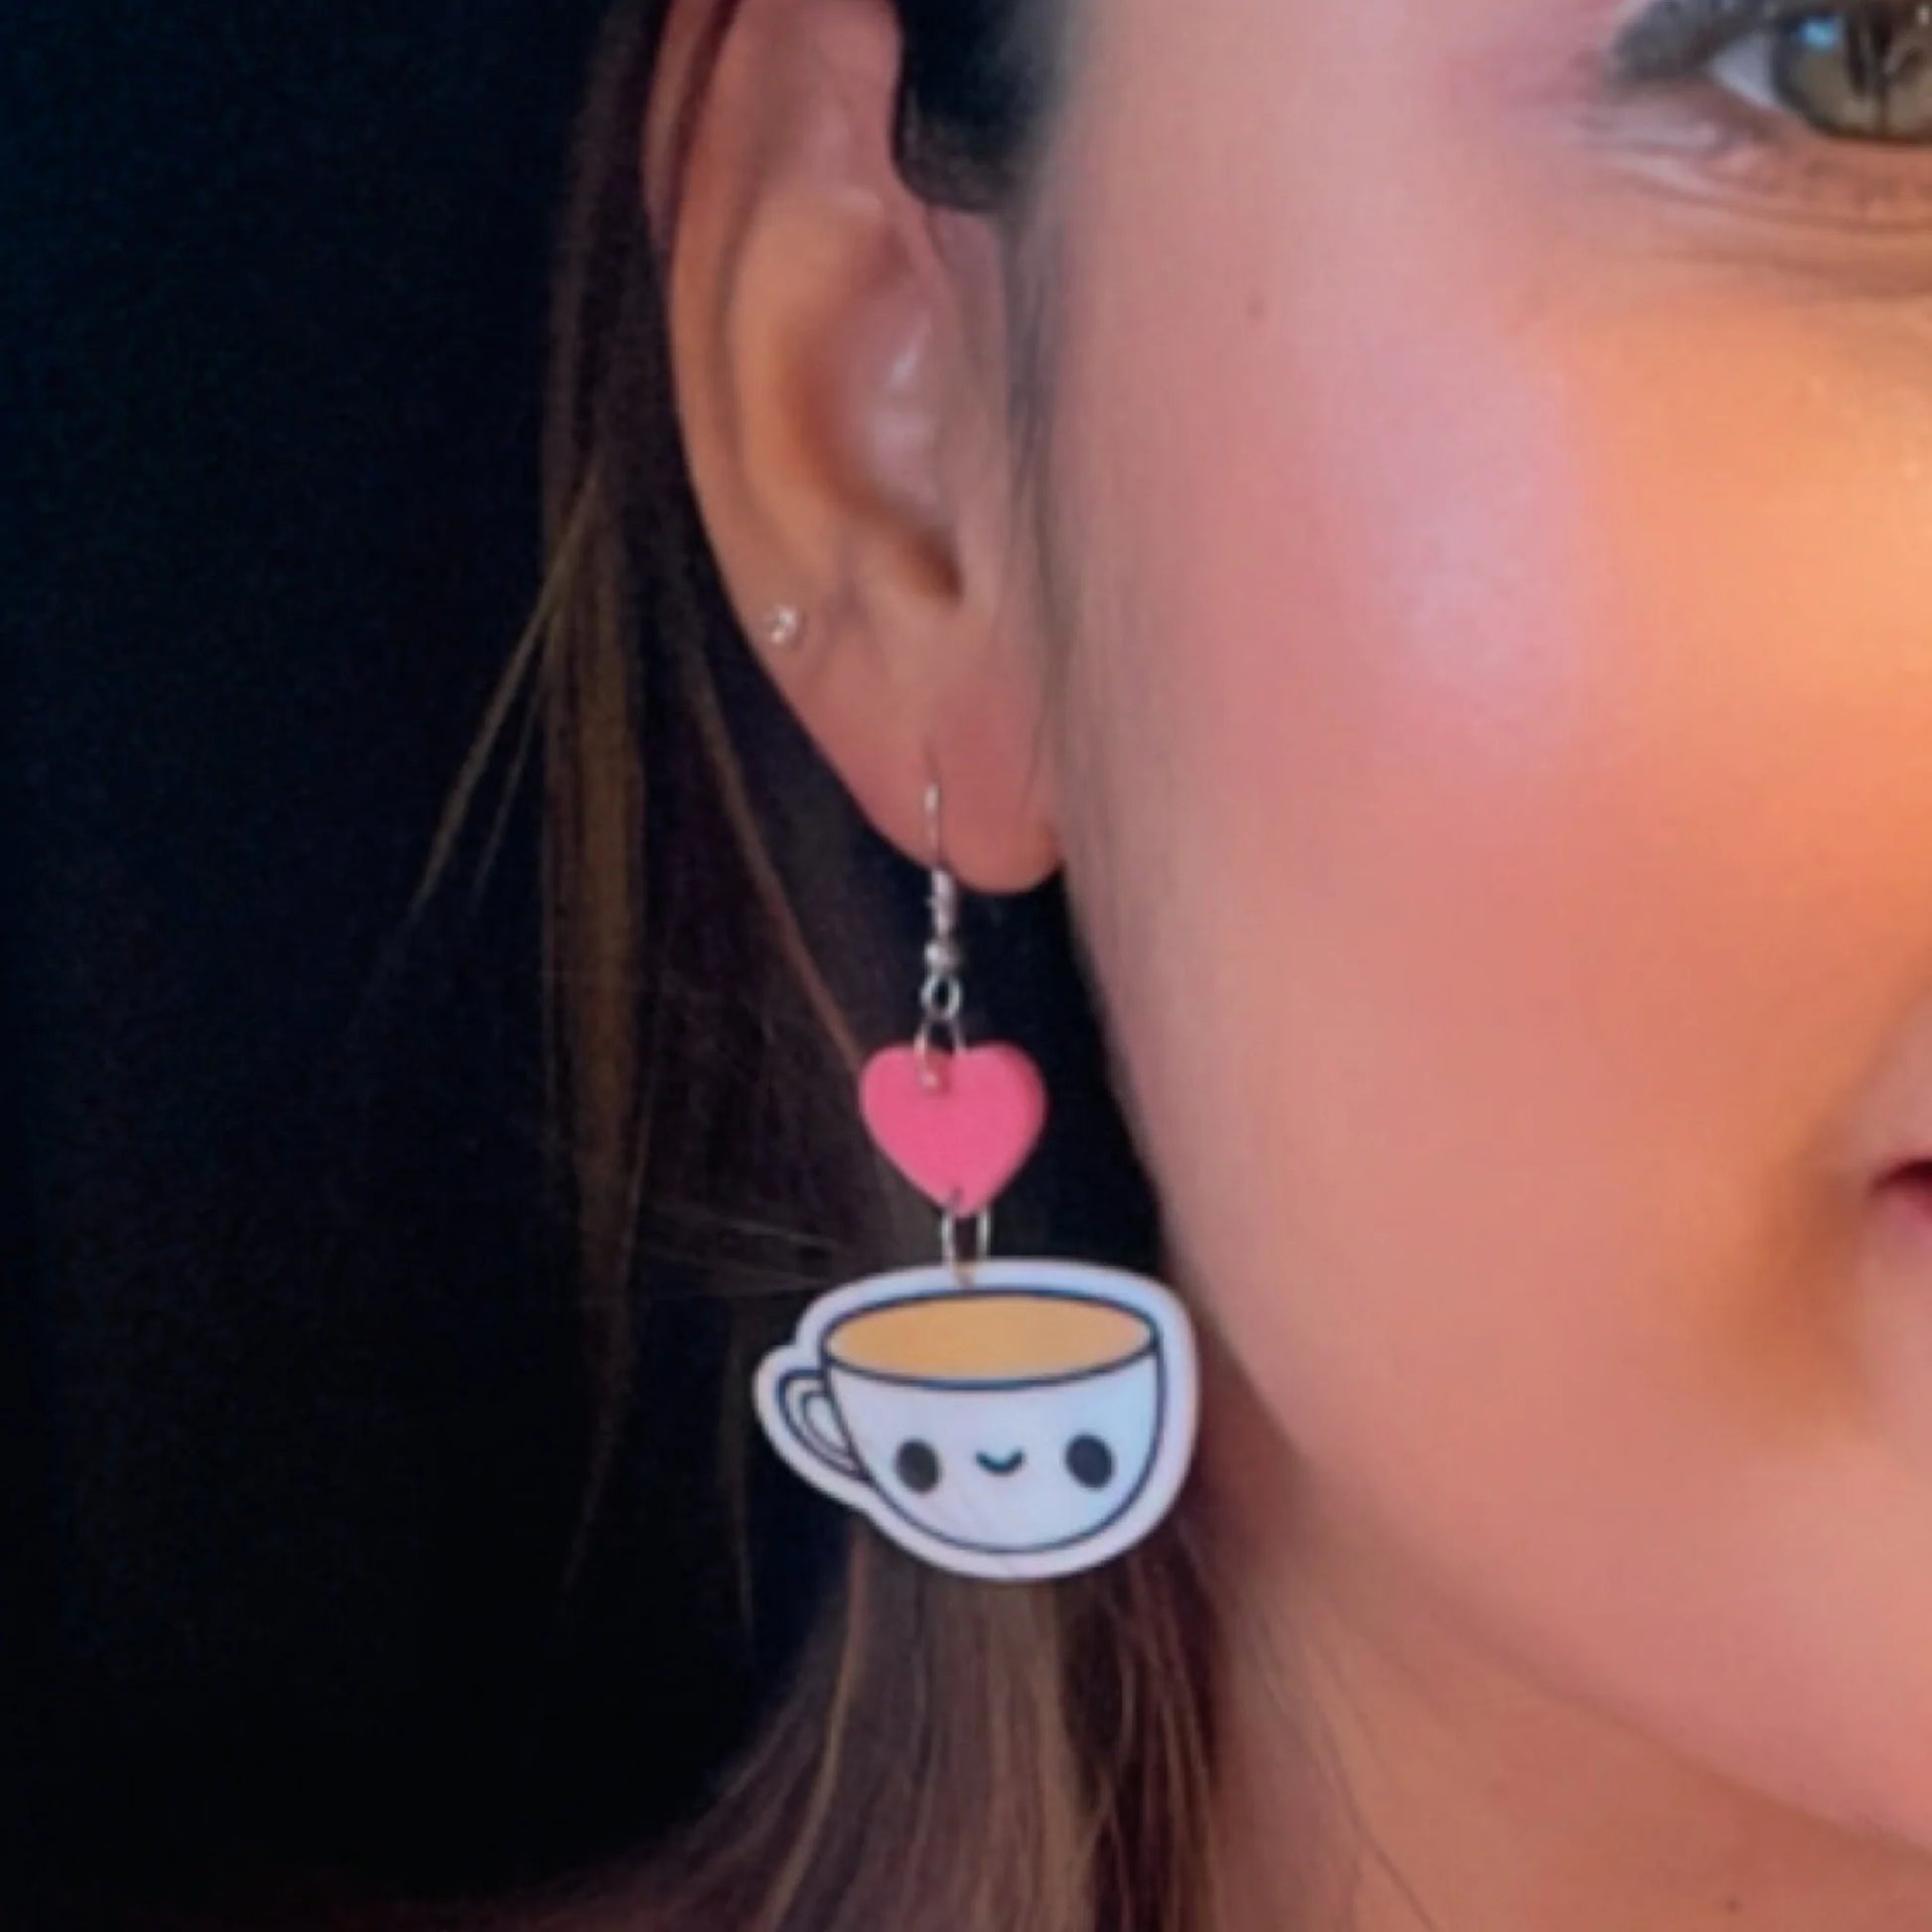 Candid Coffee Earrings - White, Pink & Brown - Nian by Nidhi - worn by a woman